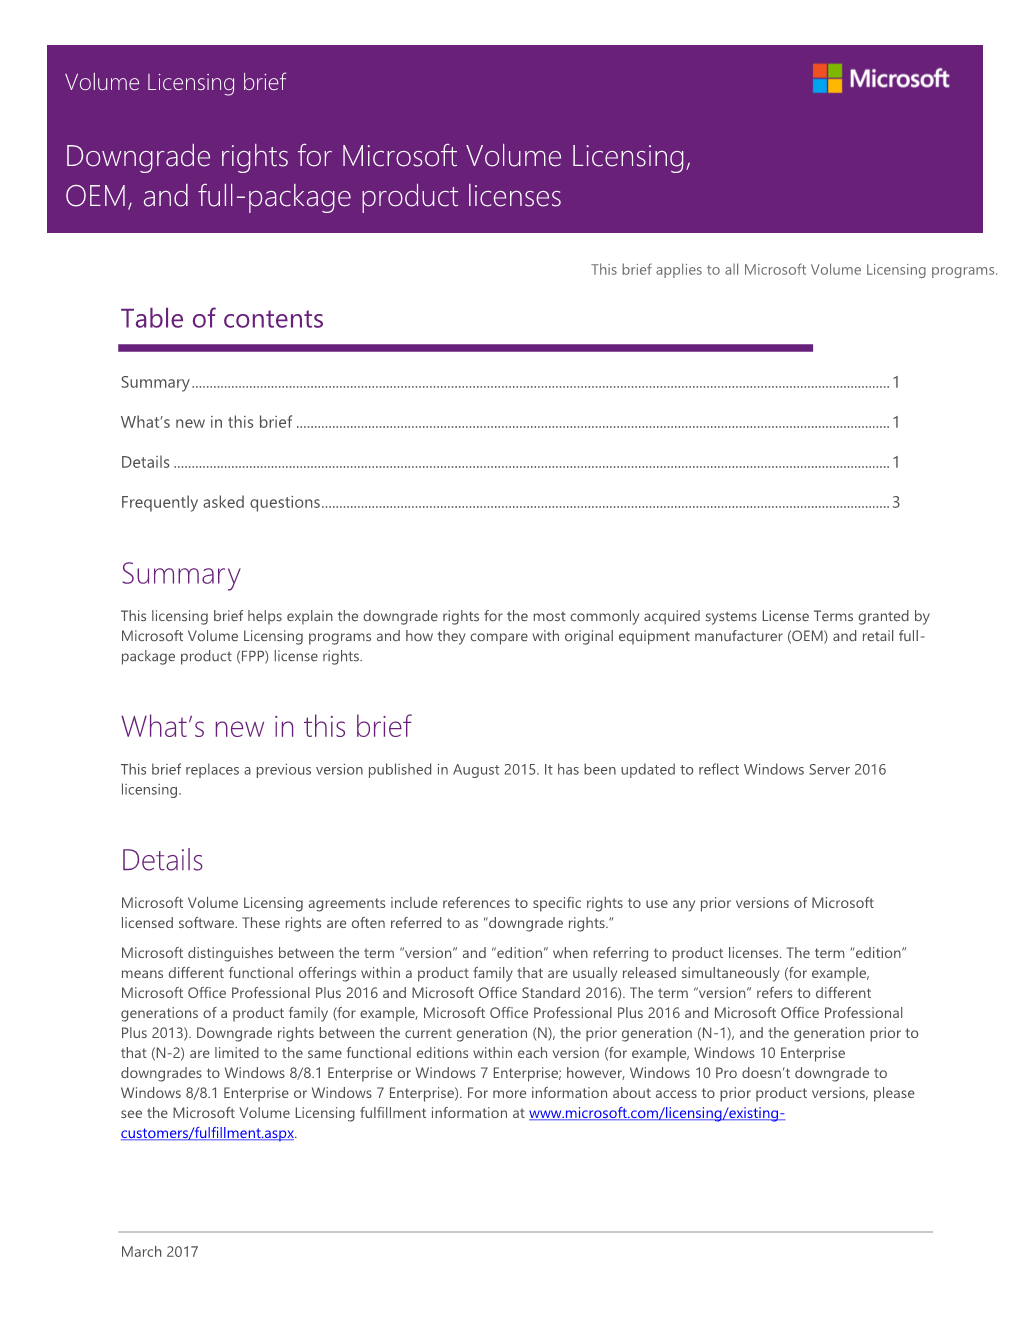 Downgrade Rights for Microsoft Volume Licensing, OEM, and Full-Package Product Licenses Summary What's New in This Brief Detai